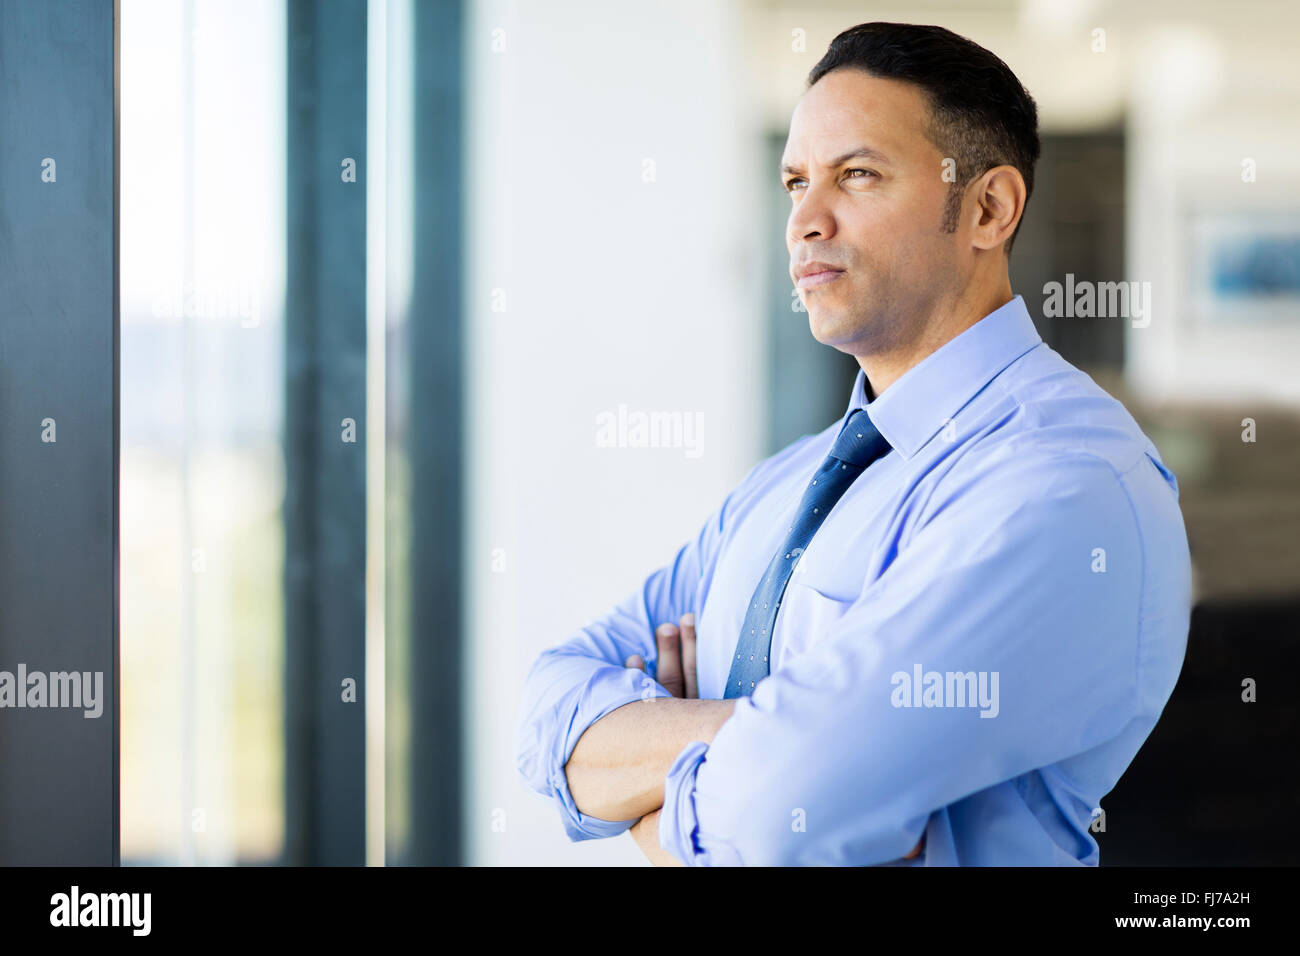 thoughtful mid age businessman with arms crossed Stock Photo